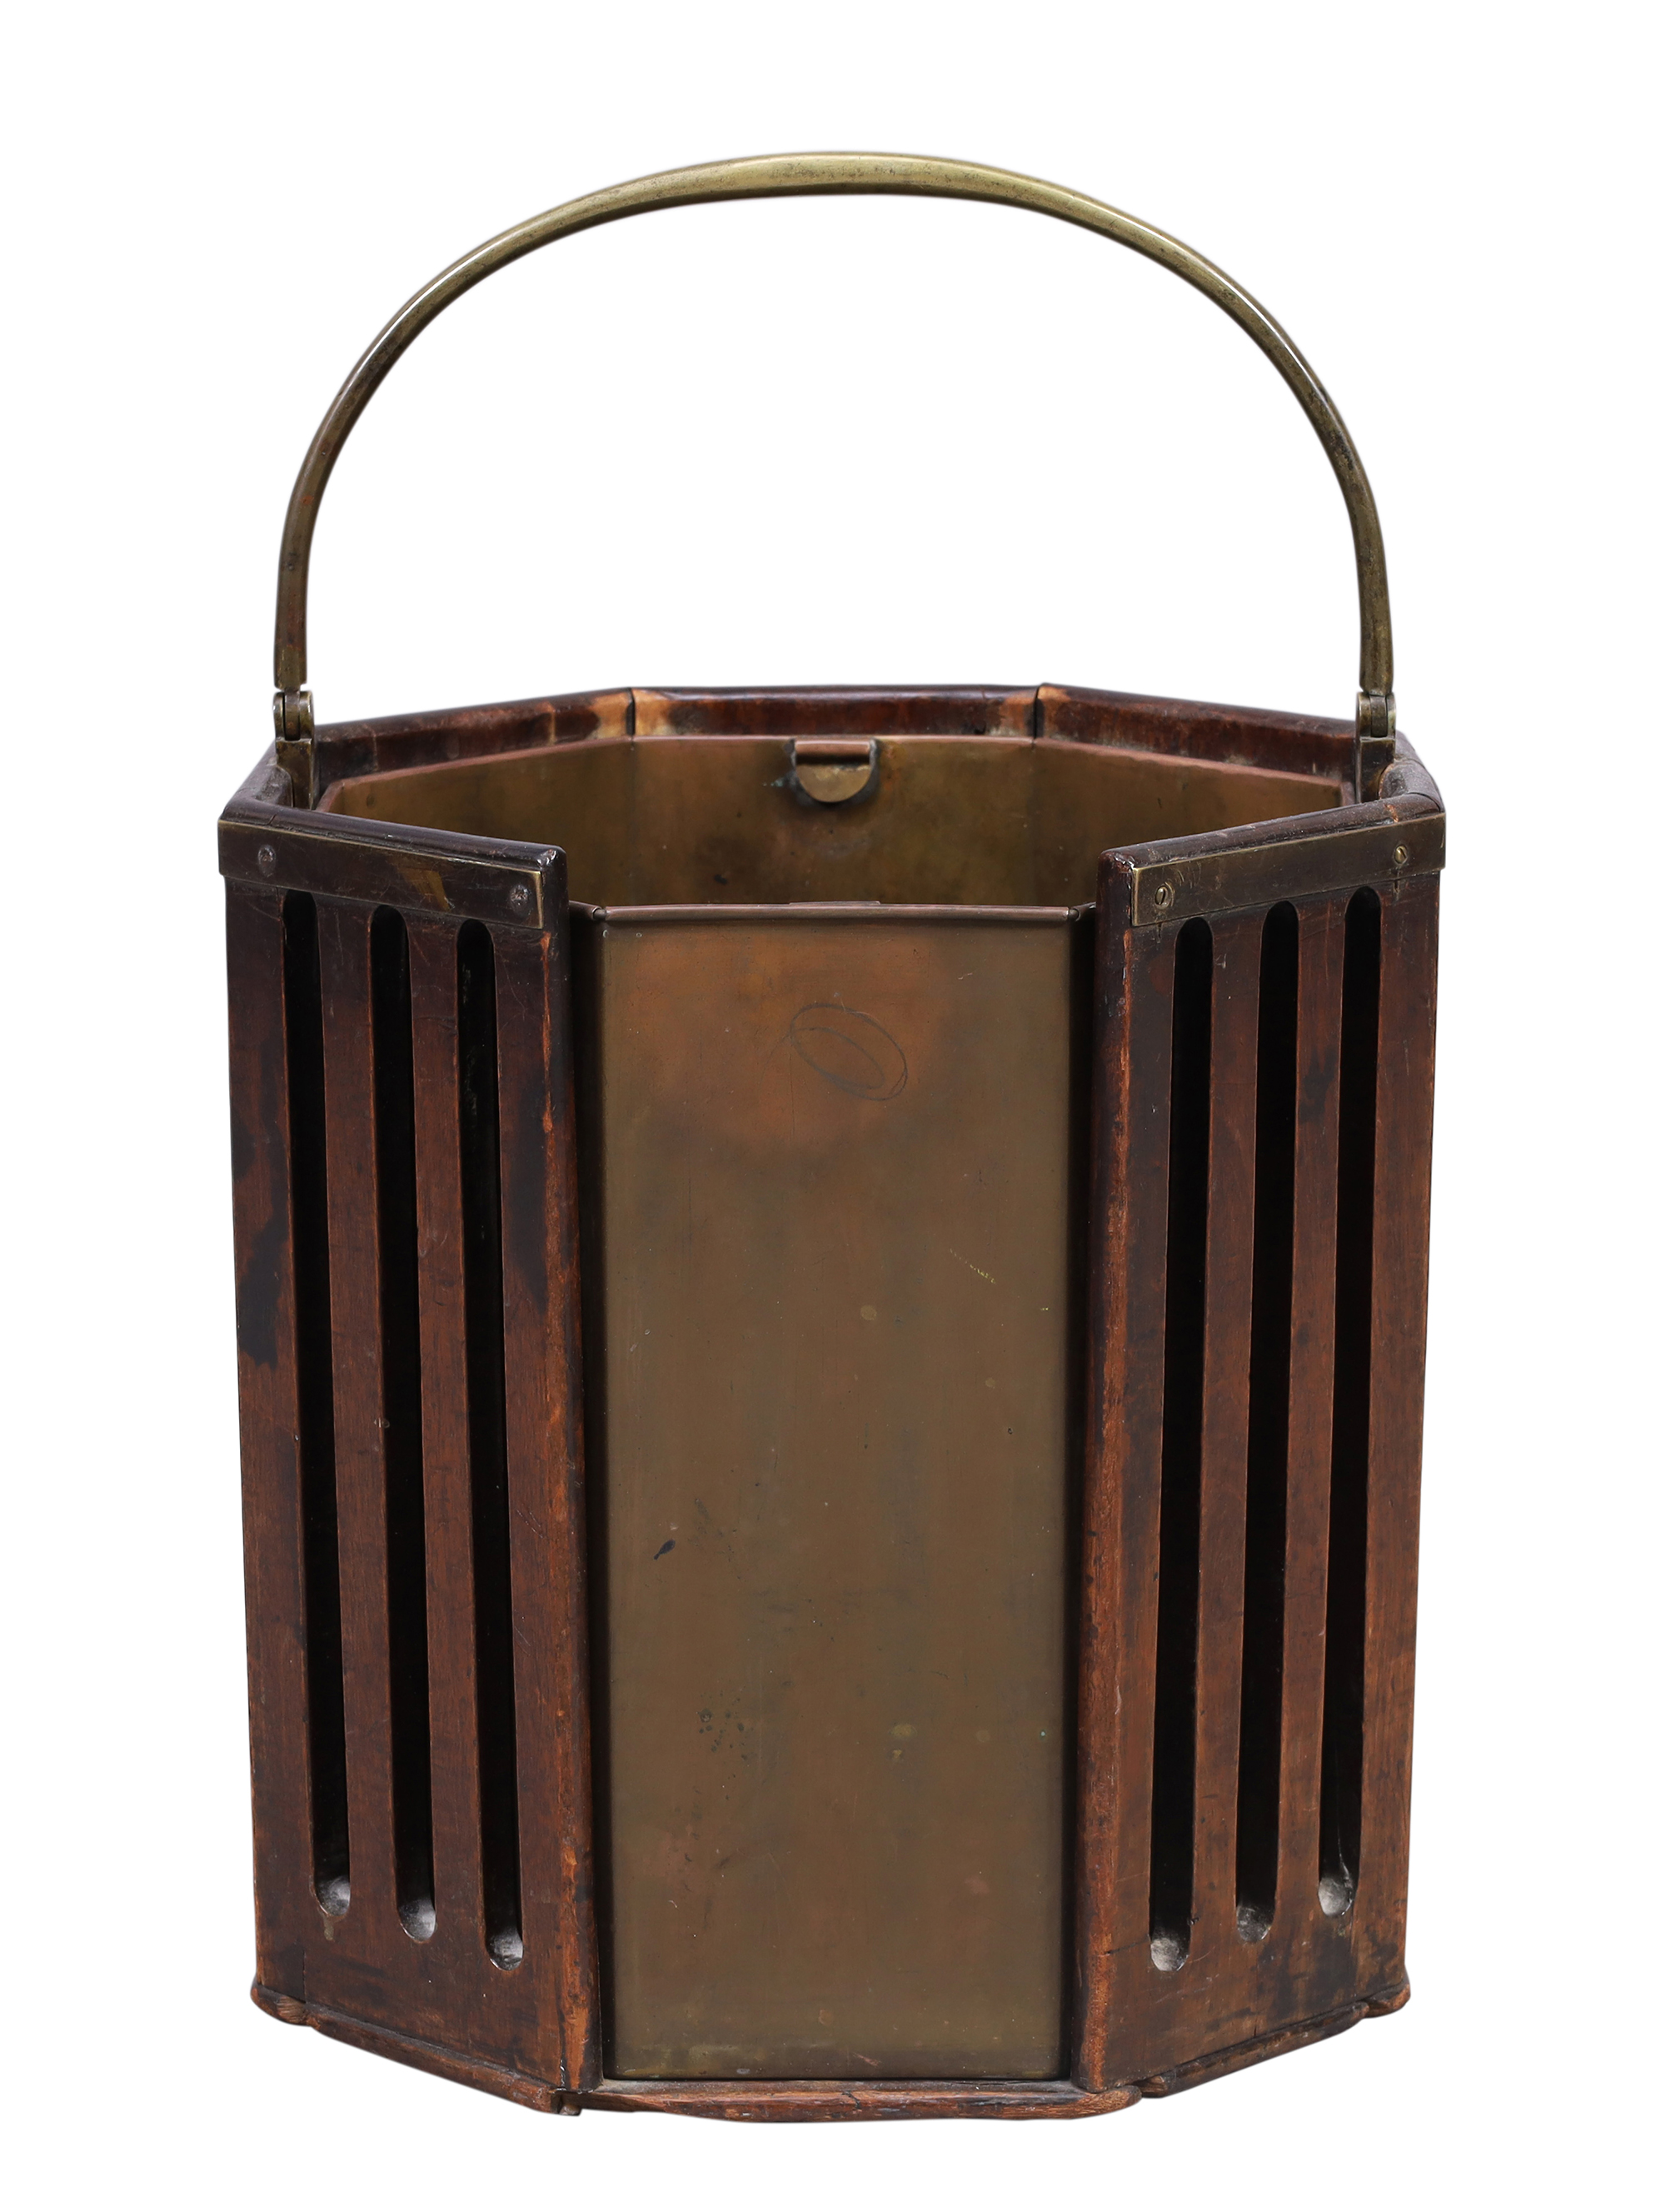 A George III mahogany plate bucket, last quarter 18th century, with slatted sides, brass handle a...